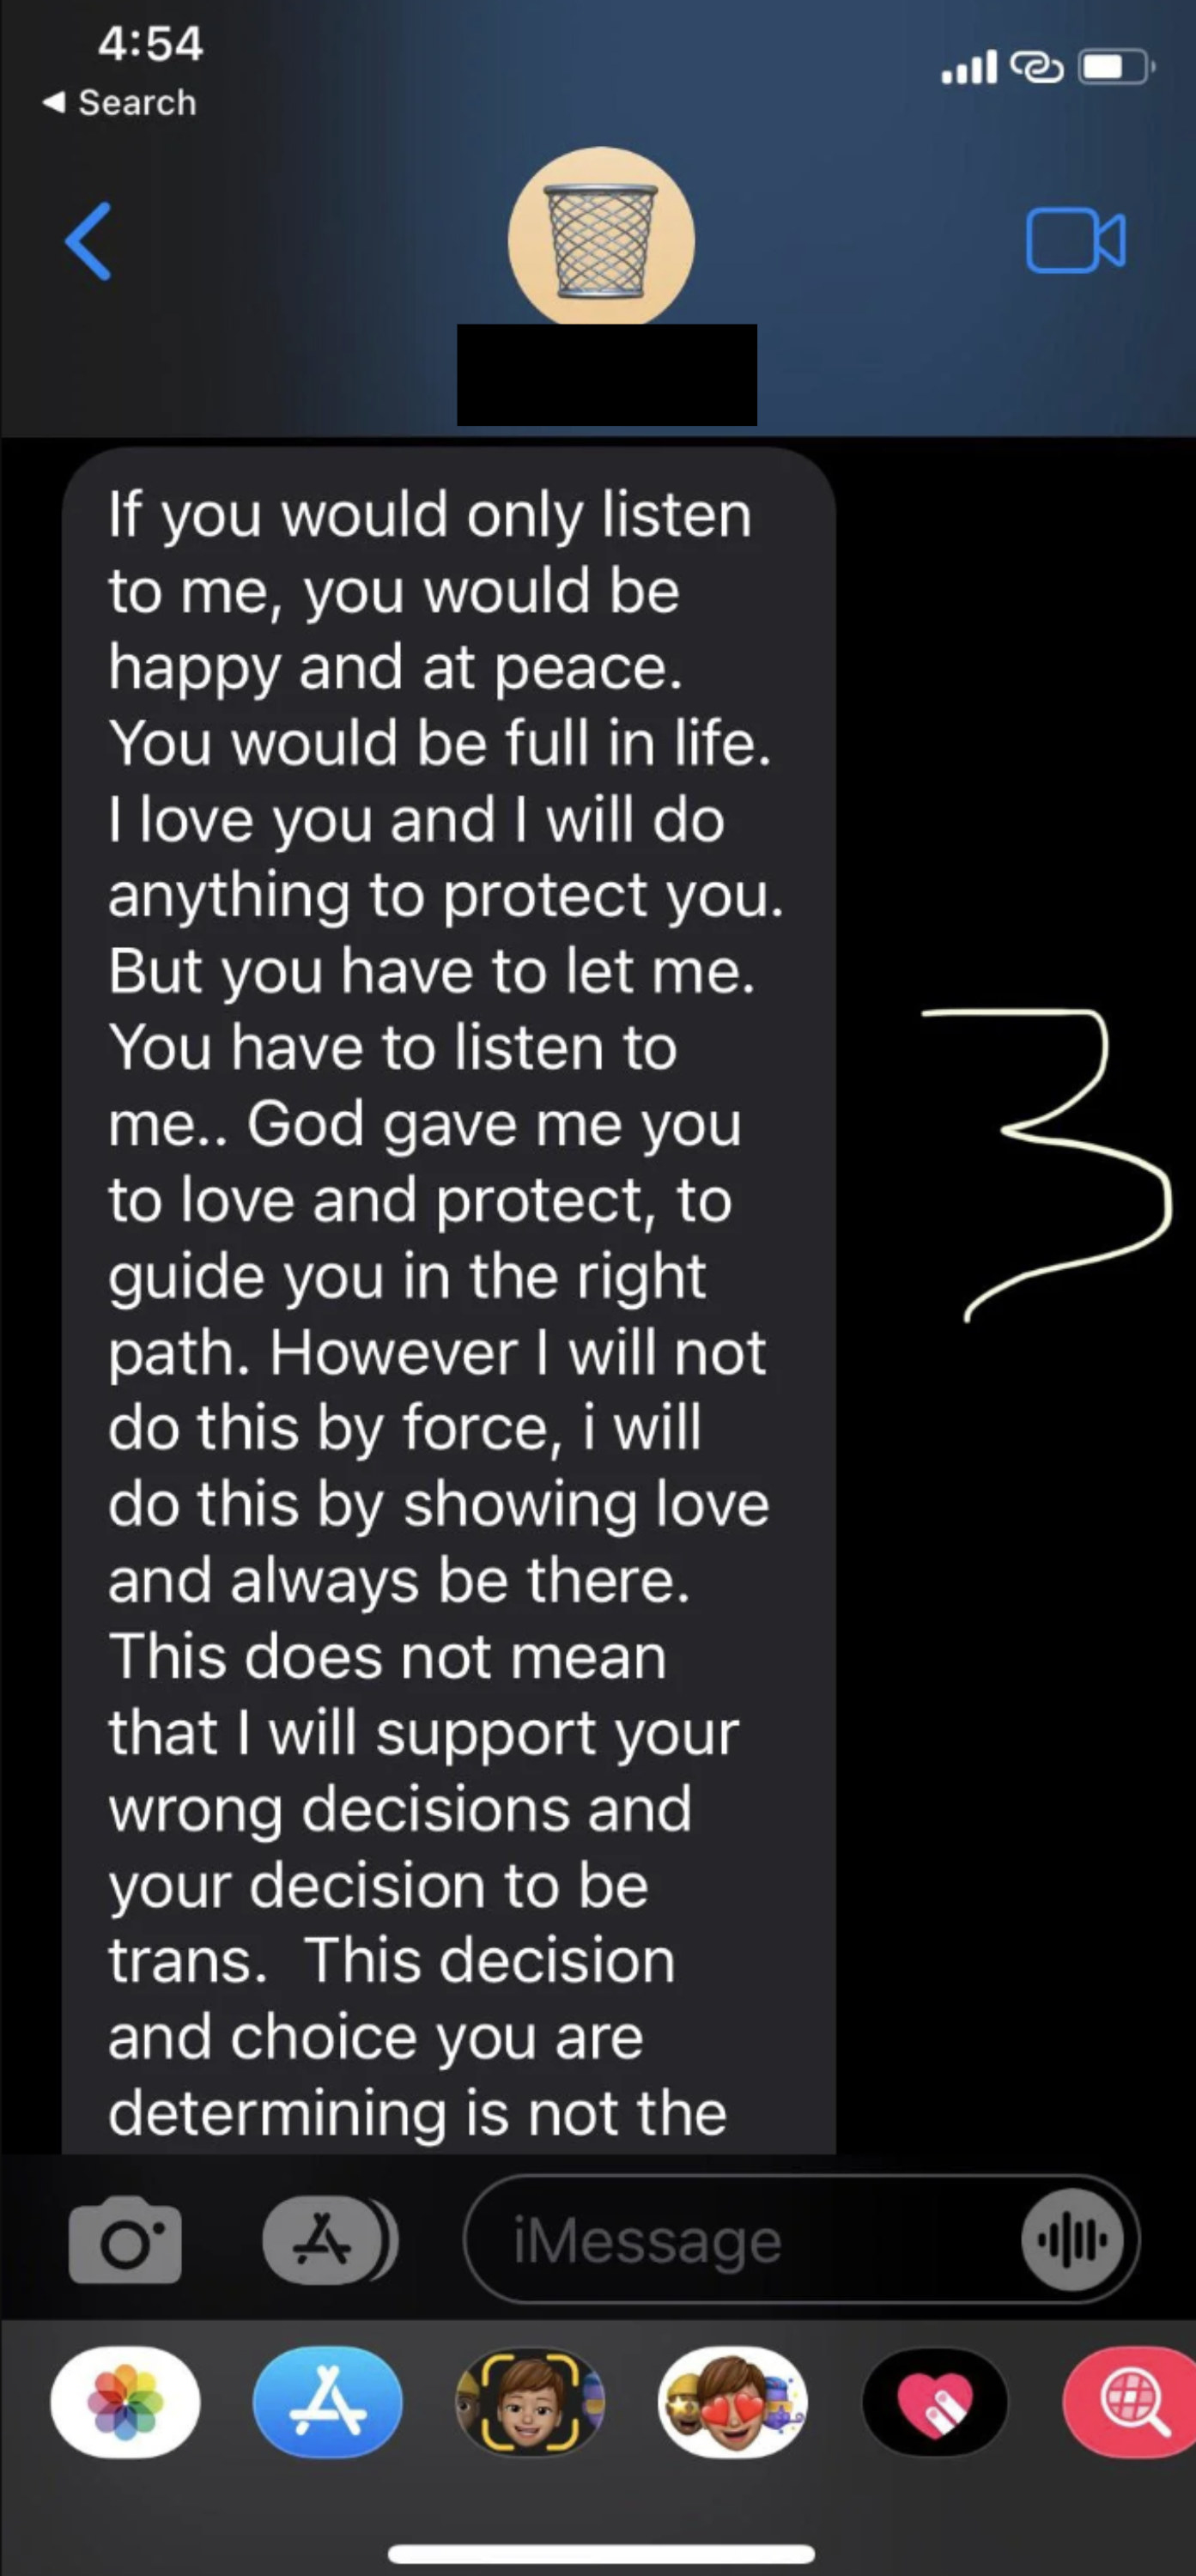 Father continues text about how God gave him his child to &quot;love and protect&quot; and &quot;guide in the right path,&quot; but says he will not &quot;support your wrong decisions and your decision to be trans&quot;